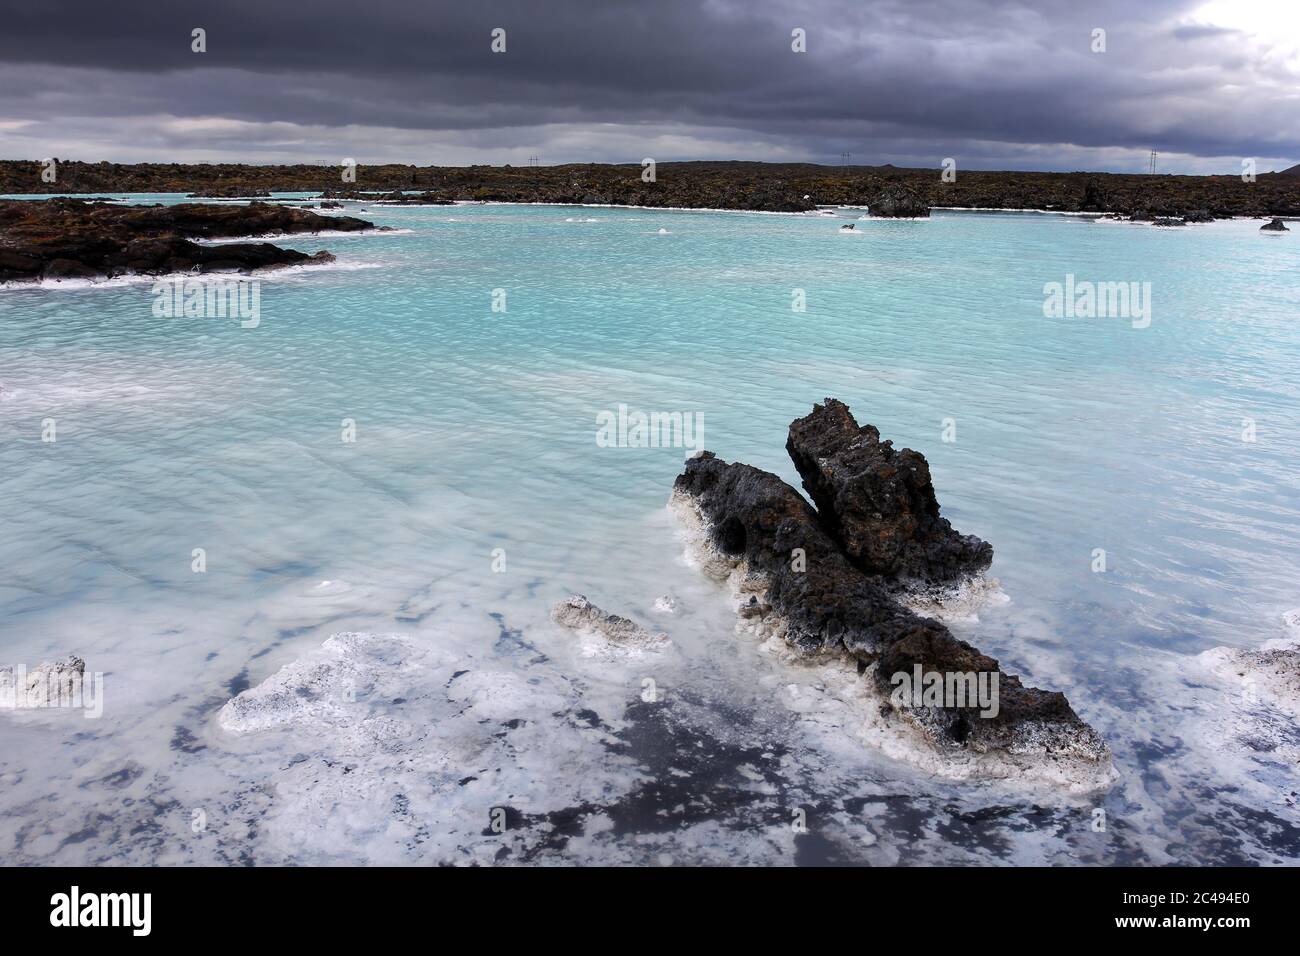 The Blue Lagoon is a man-made pool and spa fed by the waste waters of a geothermal power plant in the lava fields near Grindavik, Iceland. The blue su Stock Photo